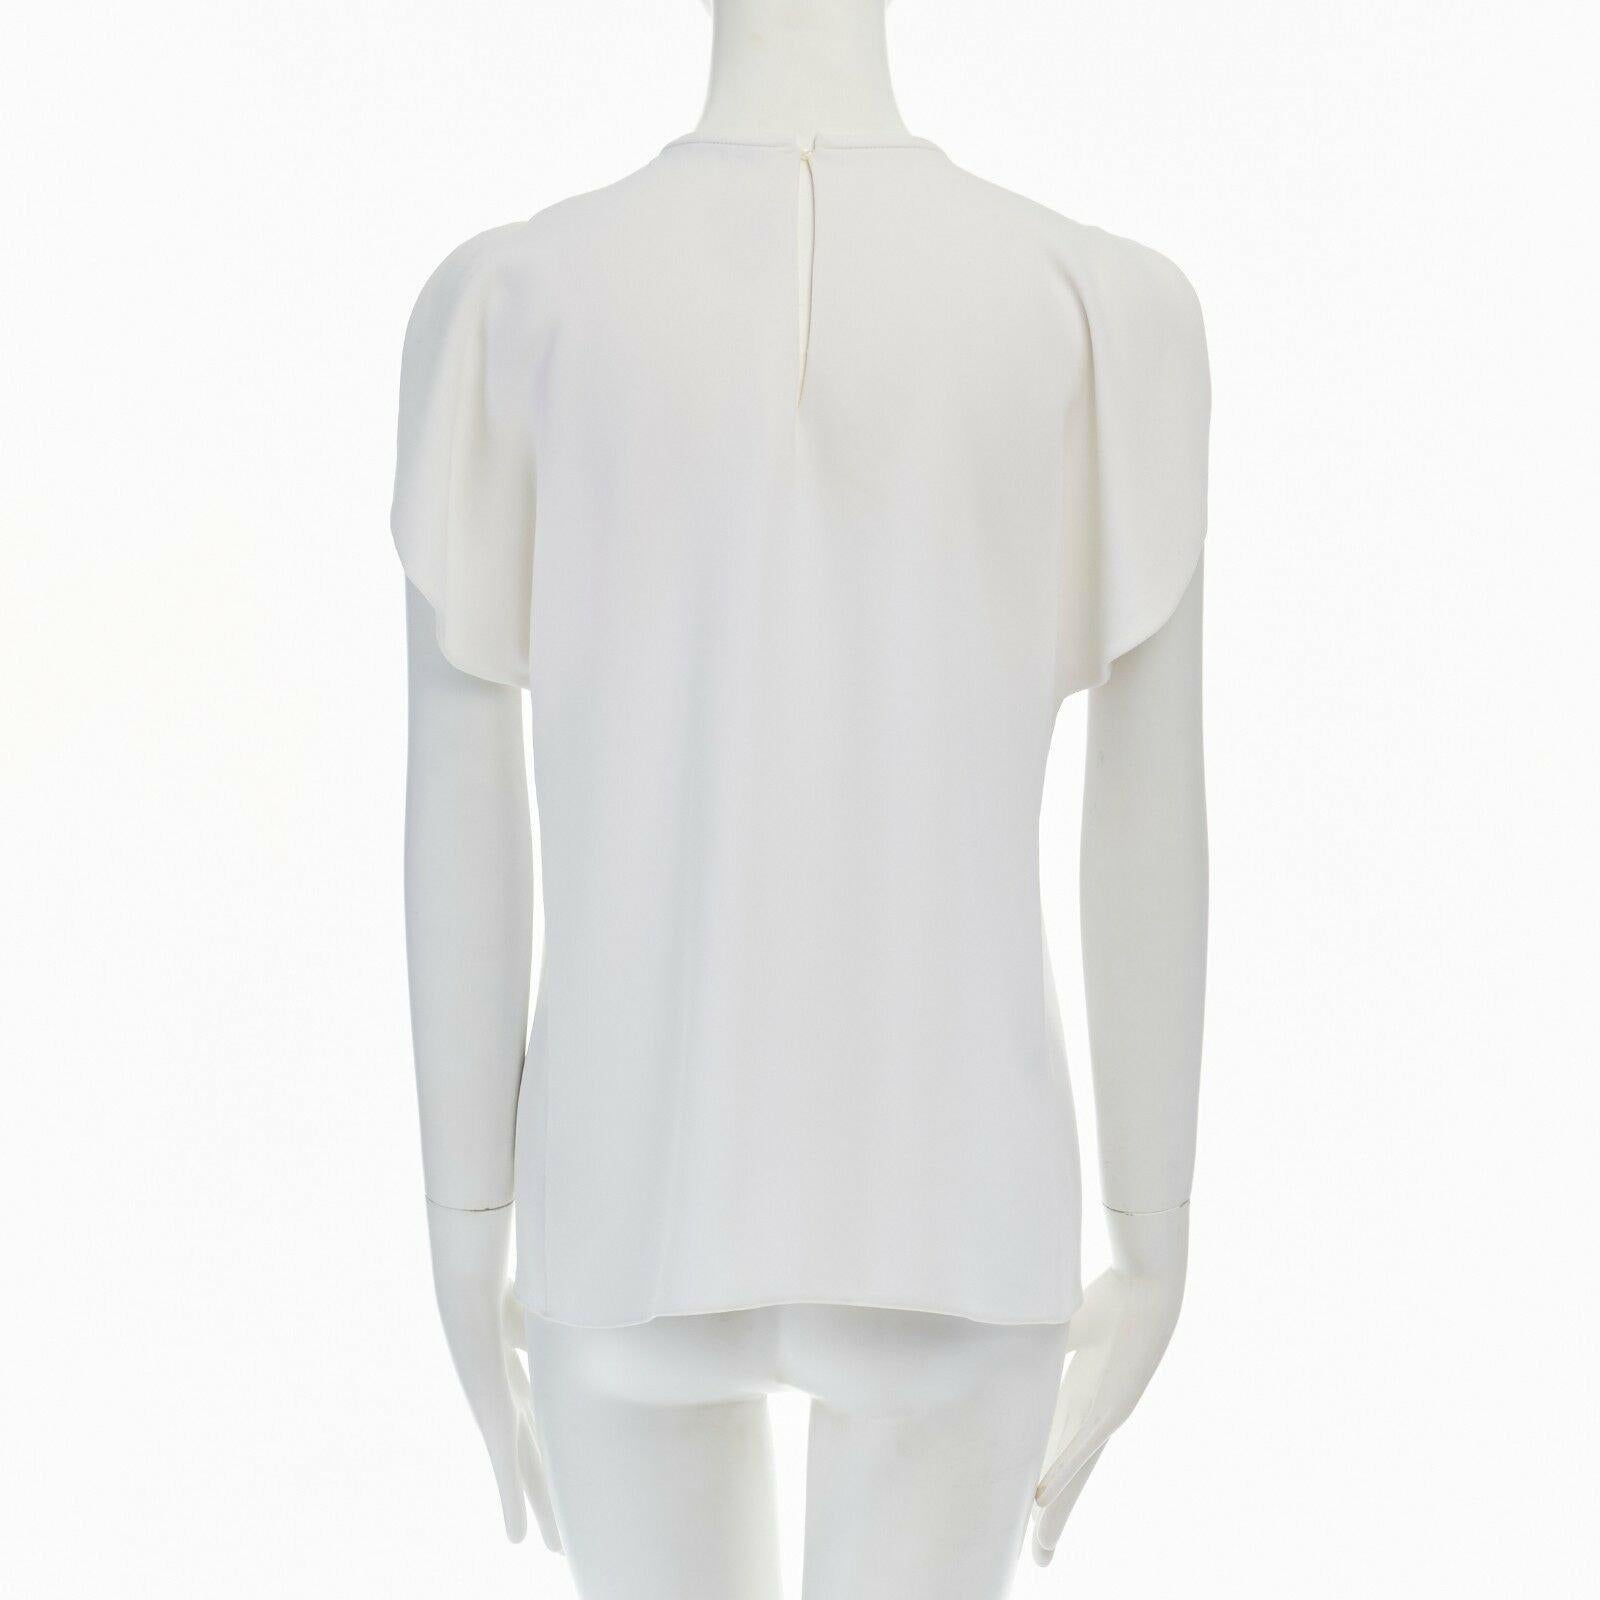 Women's BALENCIAGA 2012 white crepe rounded sleeves blouse top FR36 S